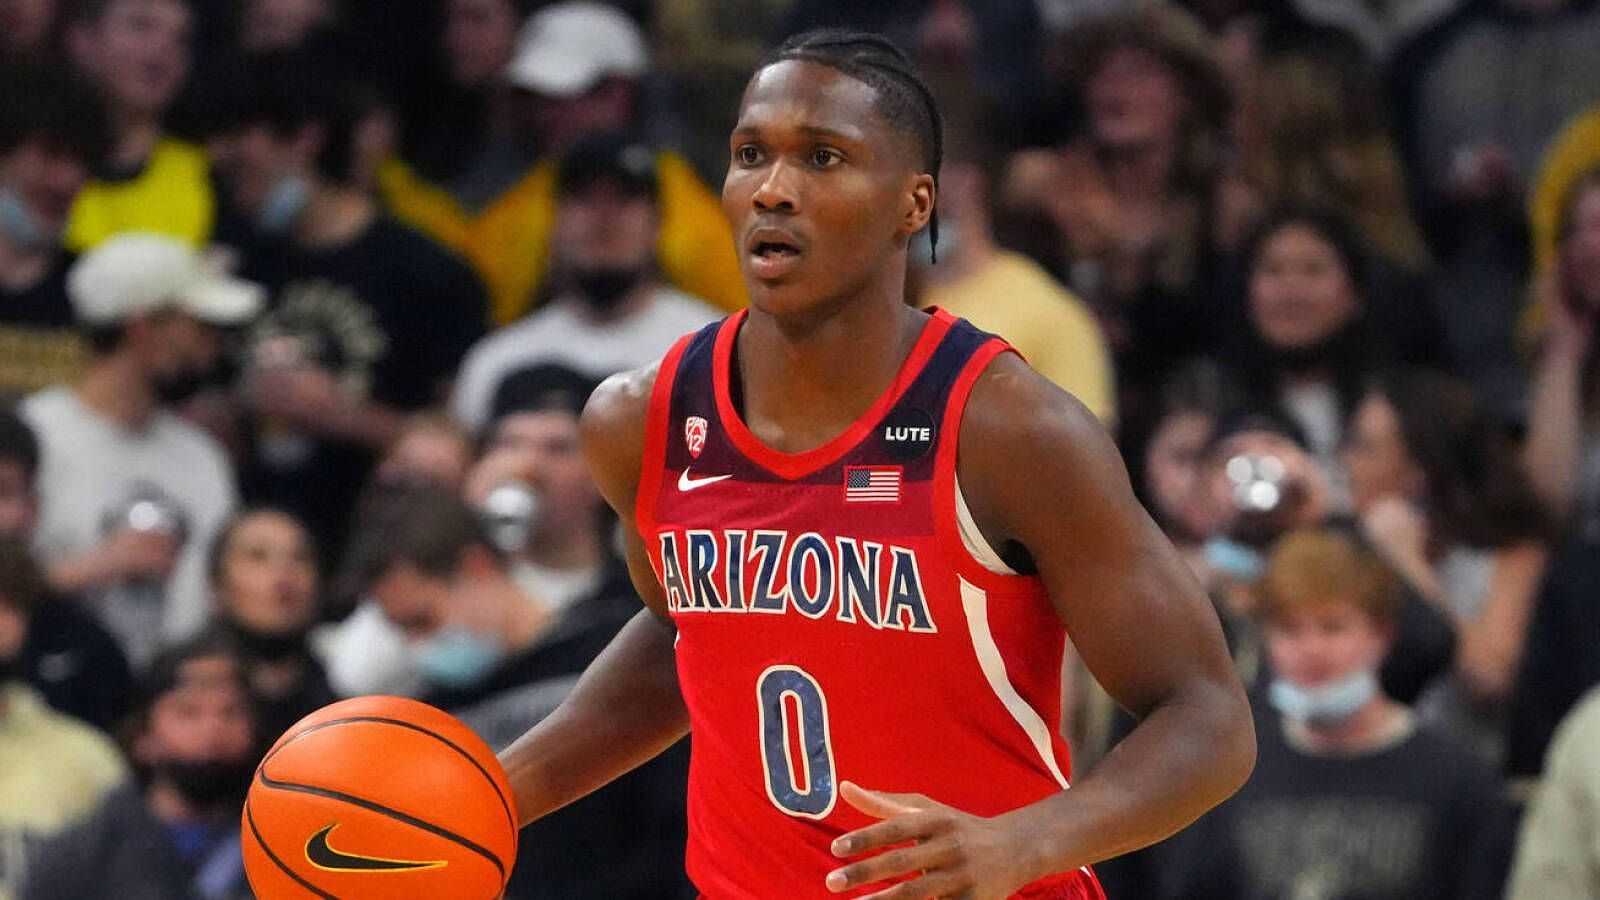 The Indiana Pacers took Bennedict Mathurin as the No. 6 pick in the NBA draft. [Photo: News7h]